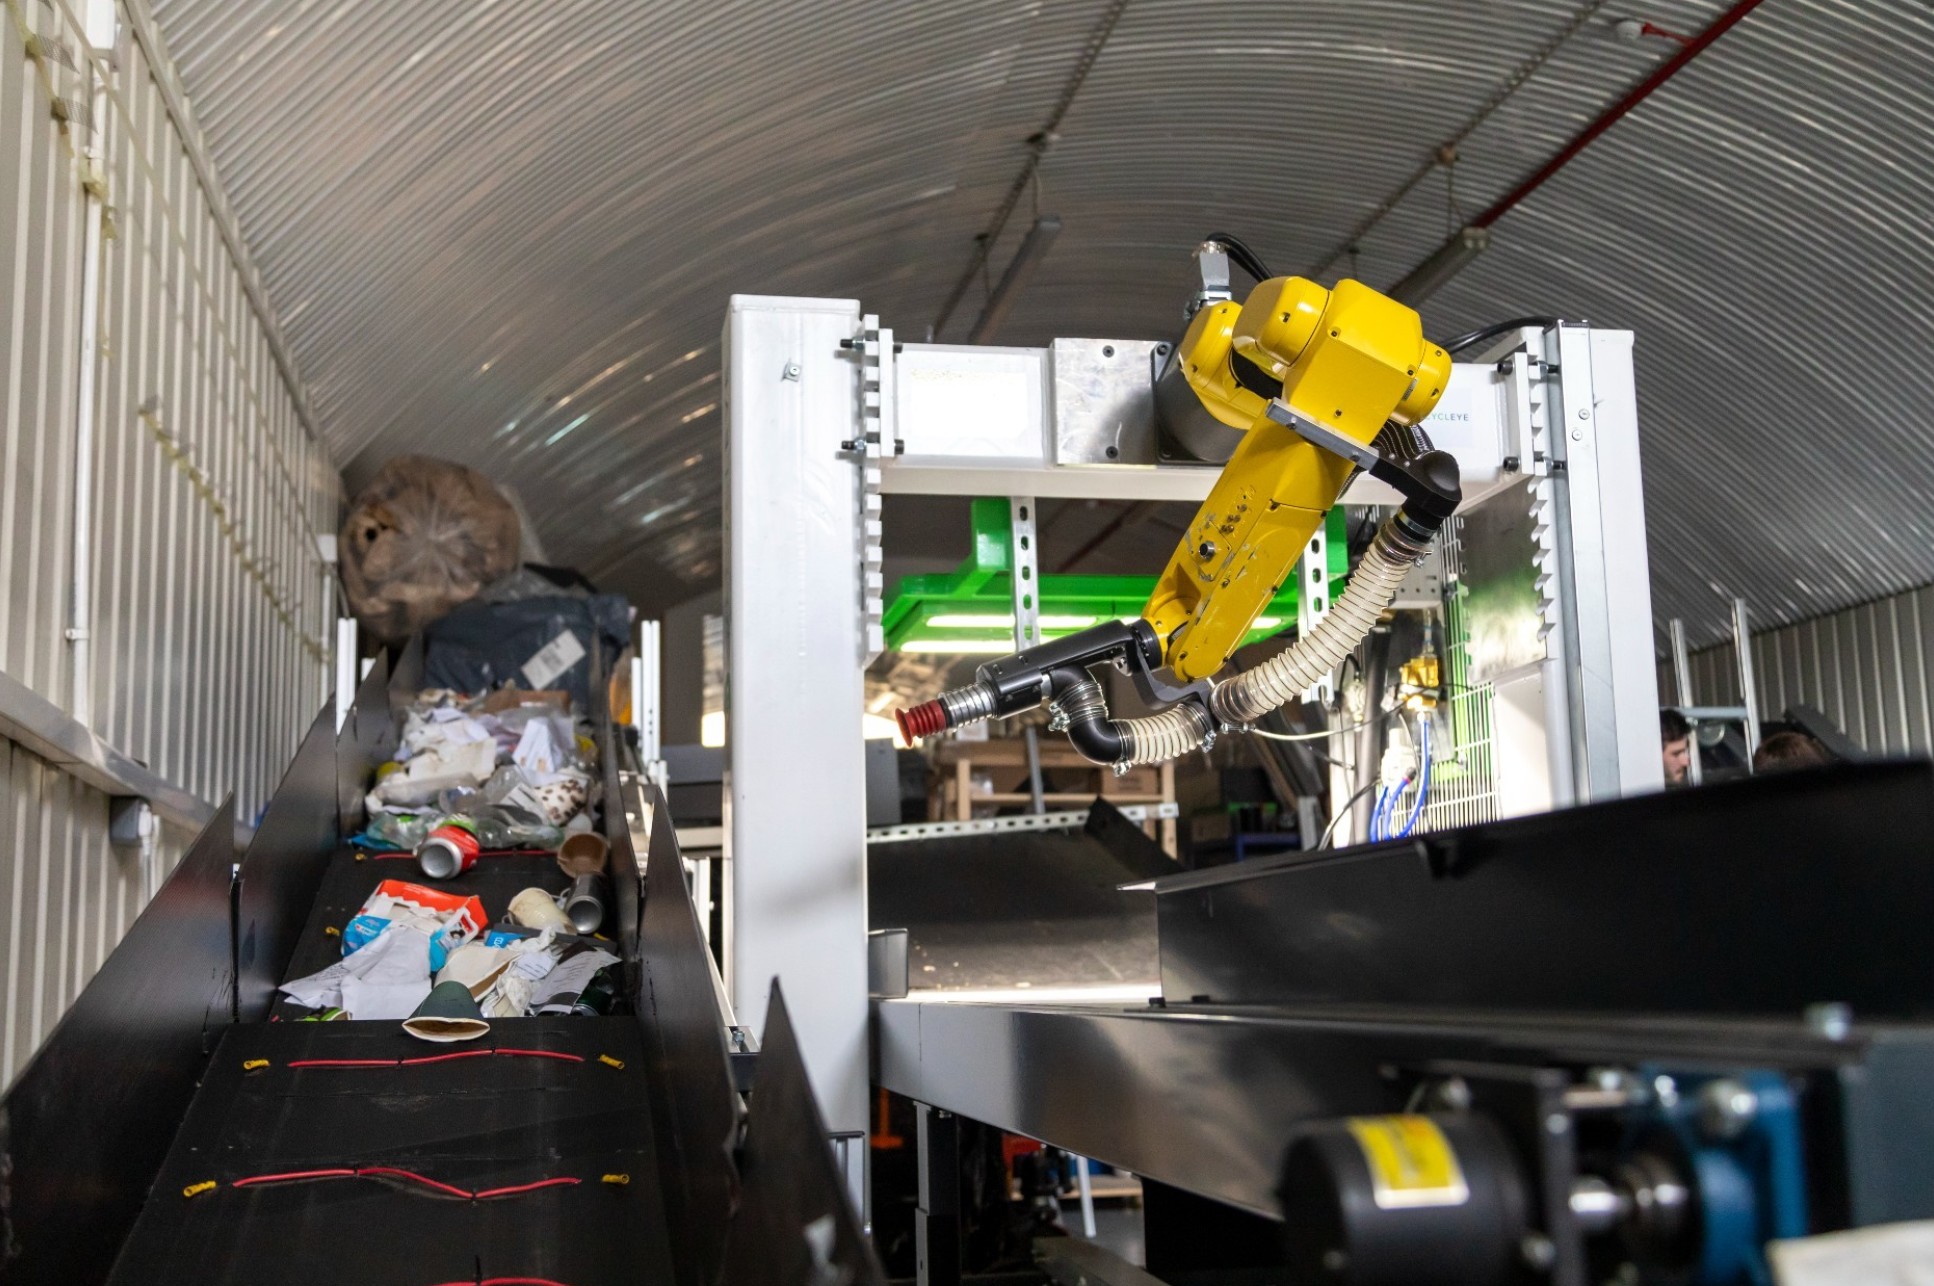 The Recycleye system combines a waste recognition system and a robotic arm to pick up waste for sorting.